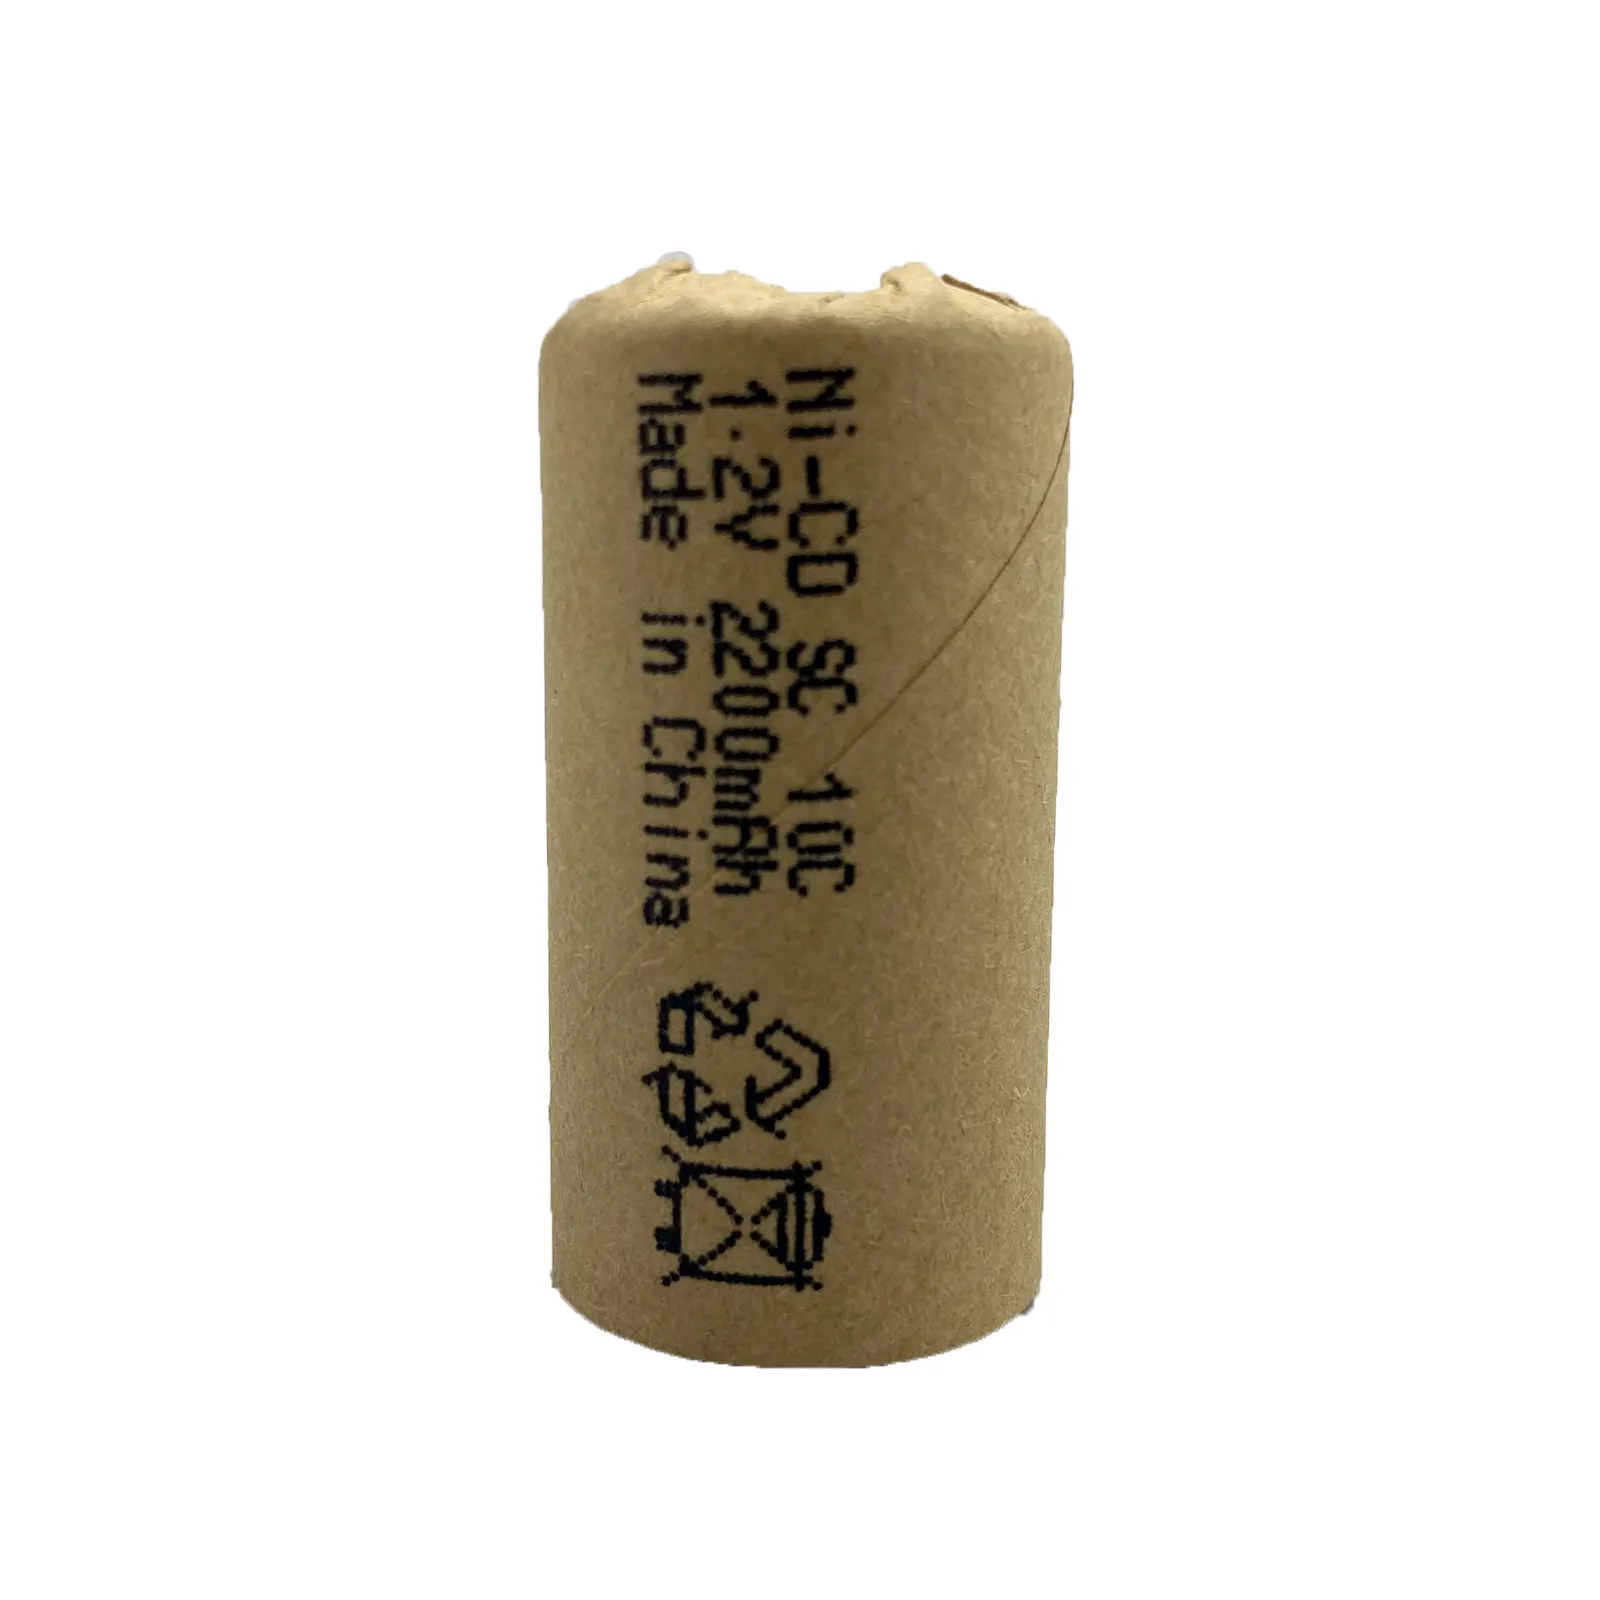 NiCad cells NiCd 1.2v rechargeable batteries ni-cd Sub C 2200mAh SC battery